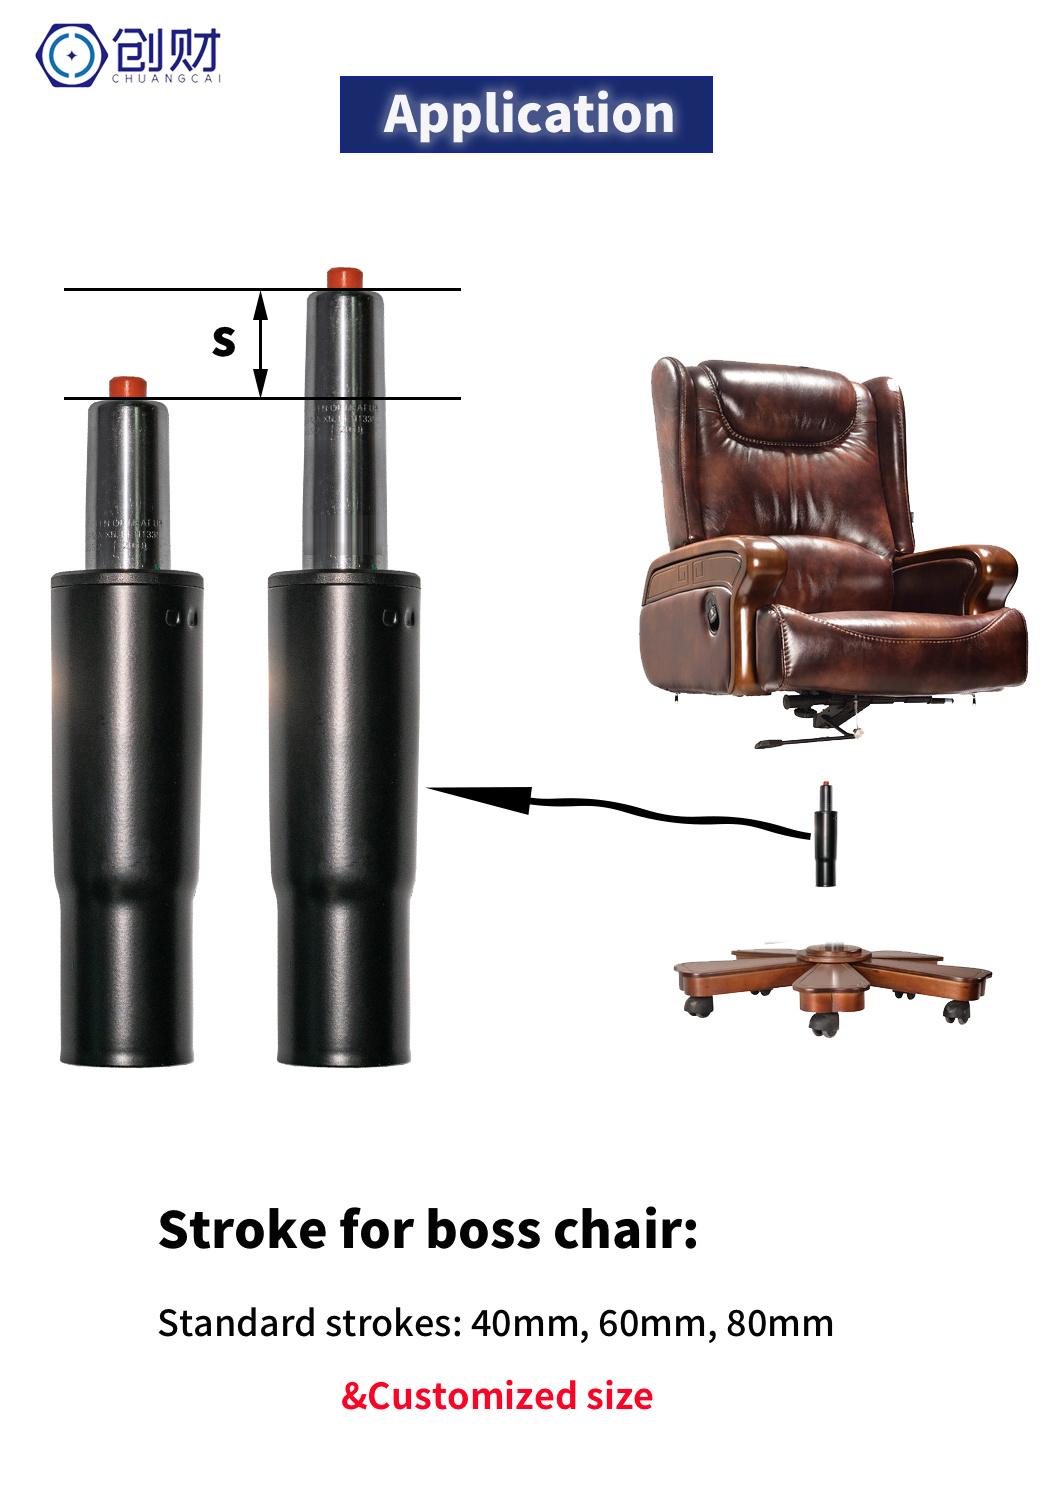 Standard Gas Lift Struts for Office Chair